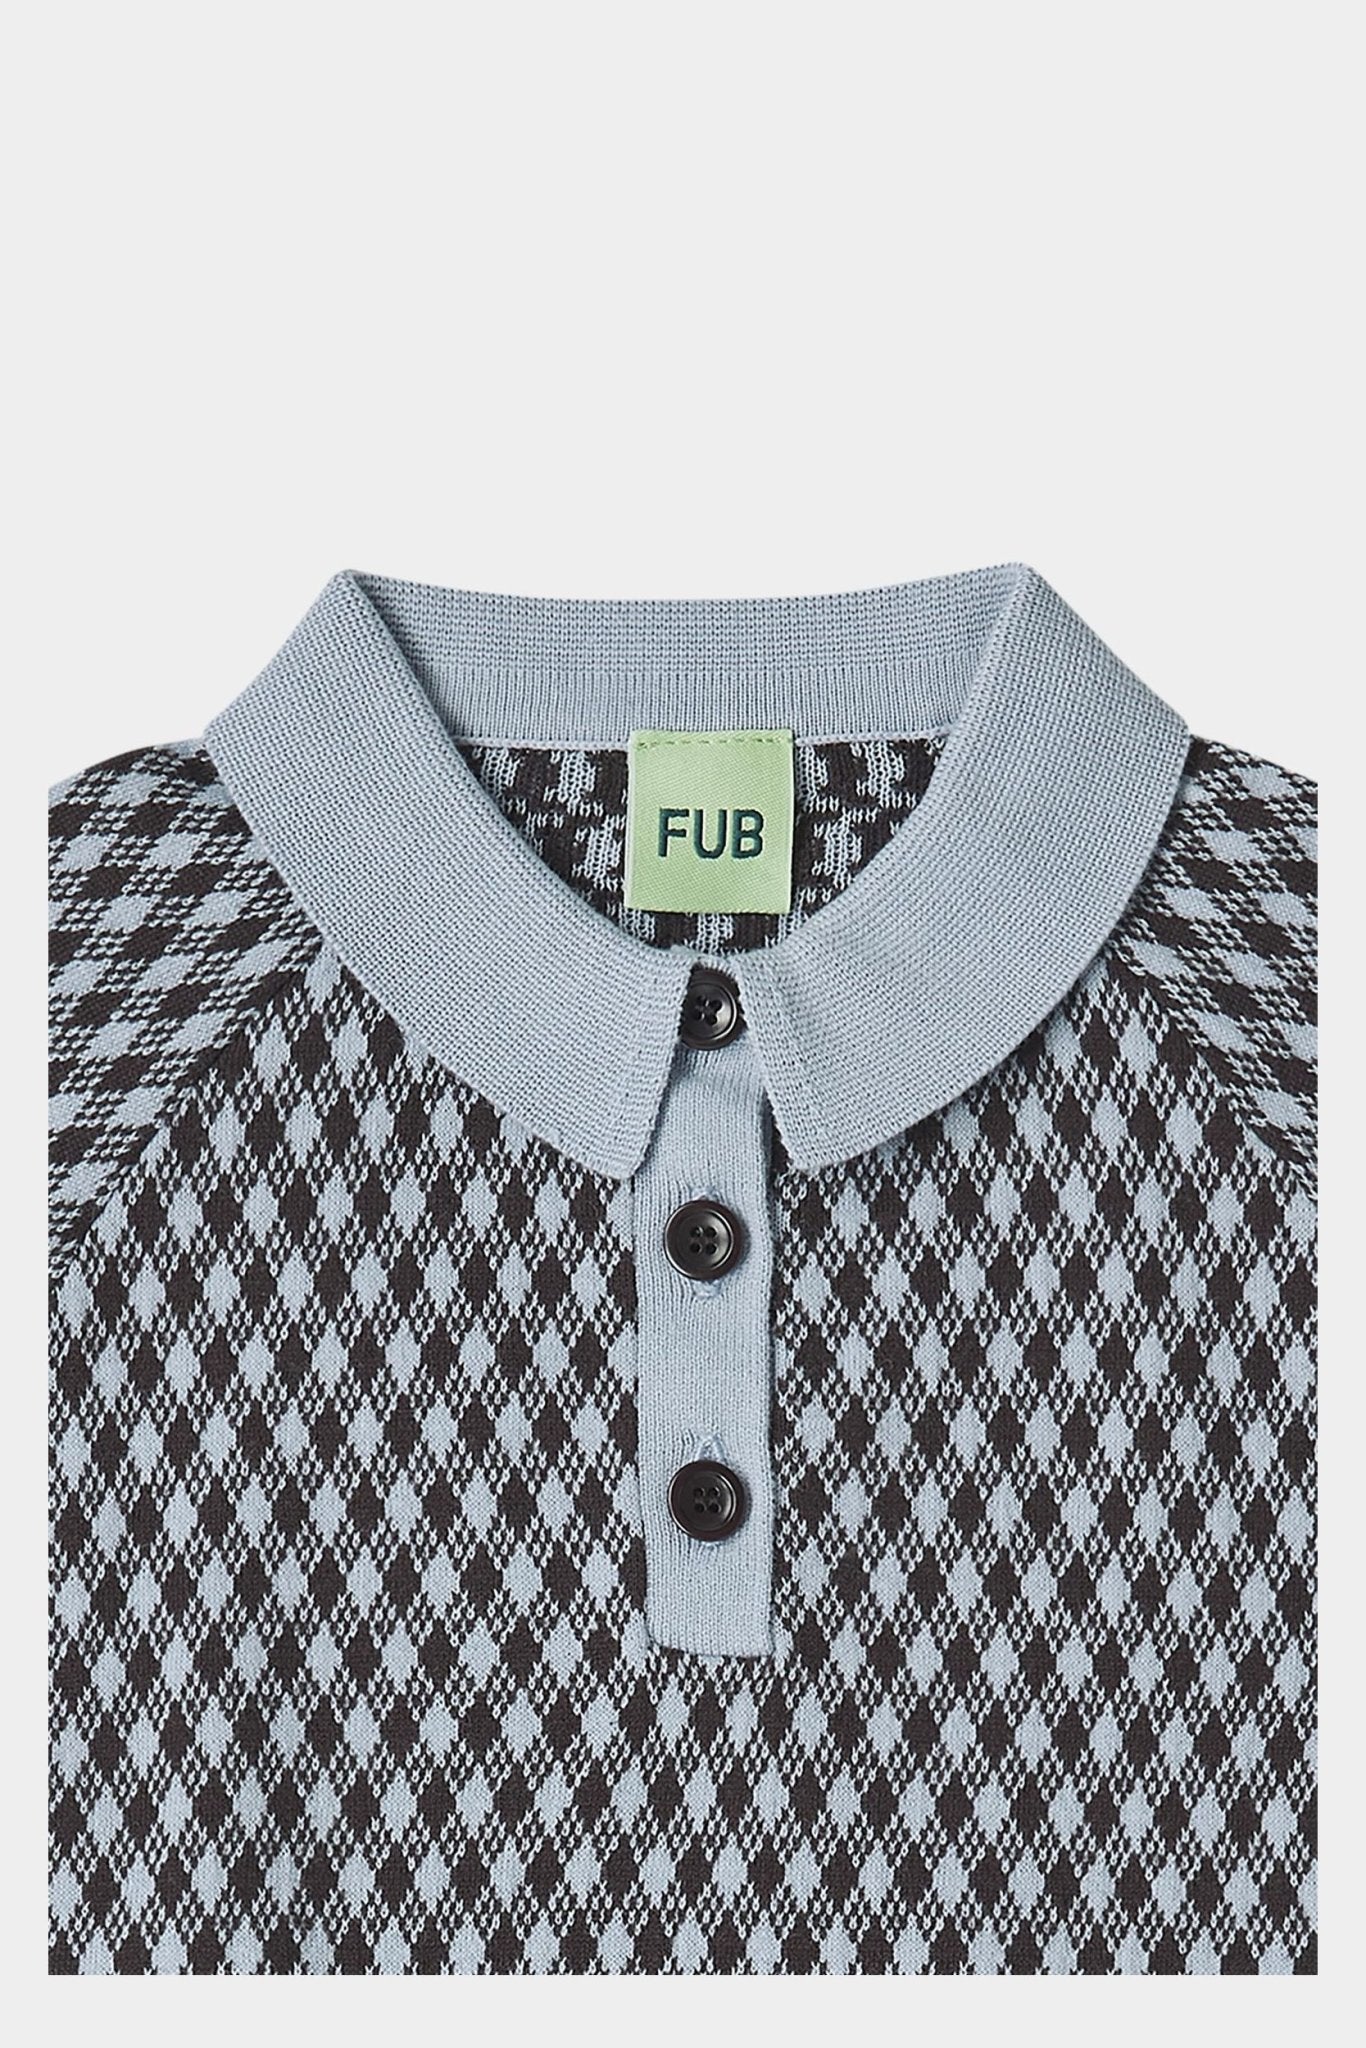 FUB HARLEKIN POLO cloud/mulberry-2524SS_cloudmulberry - Lille Univers